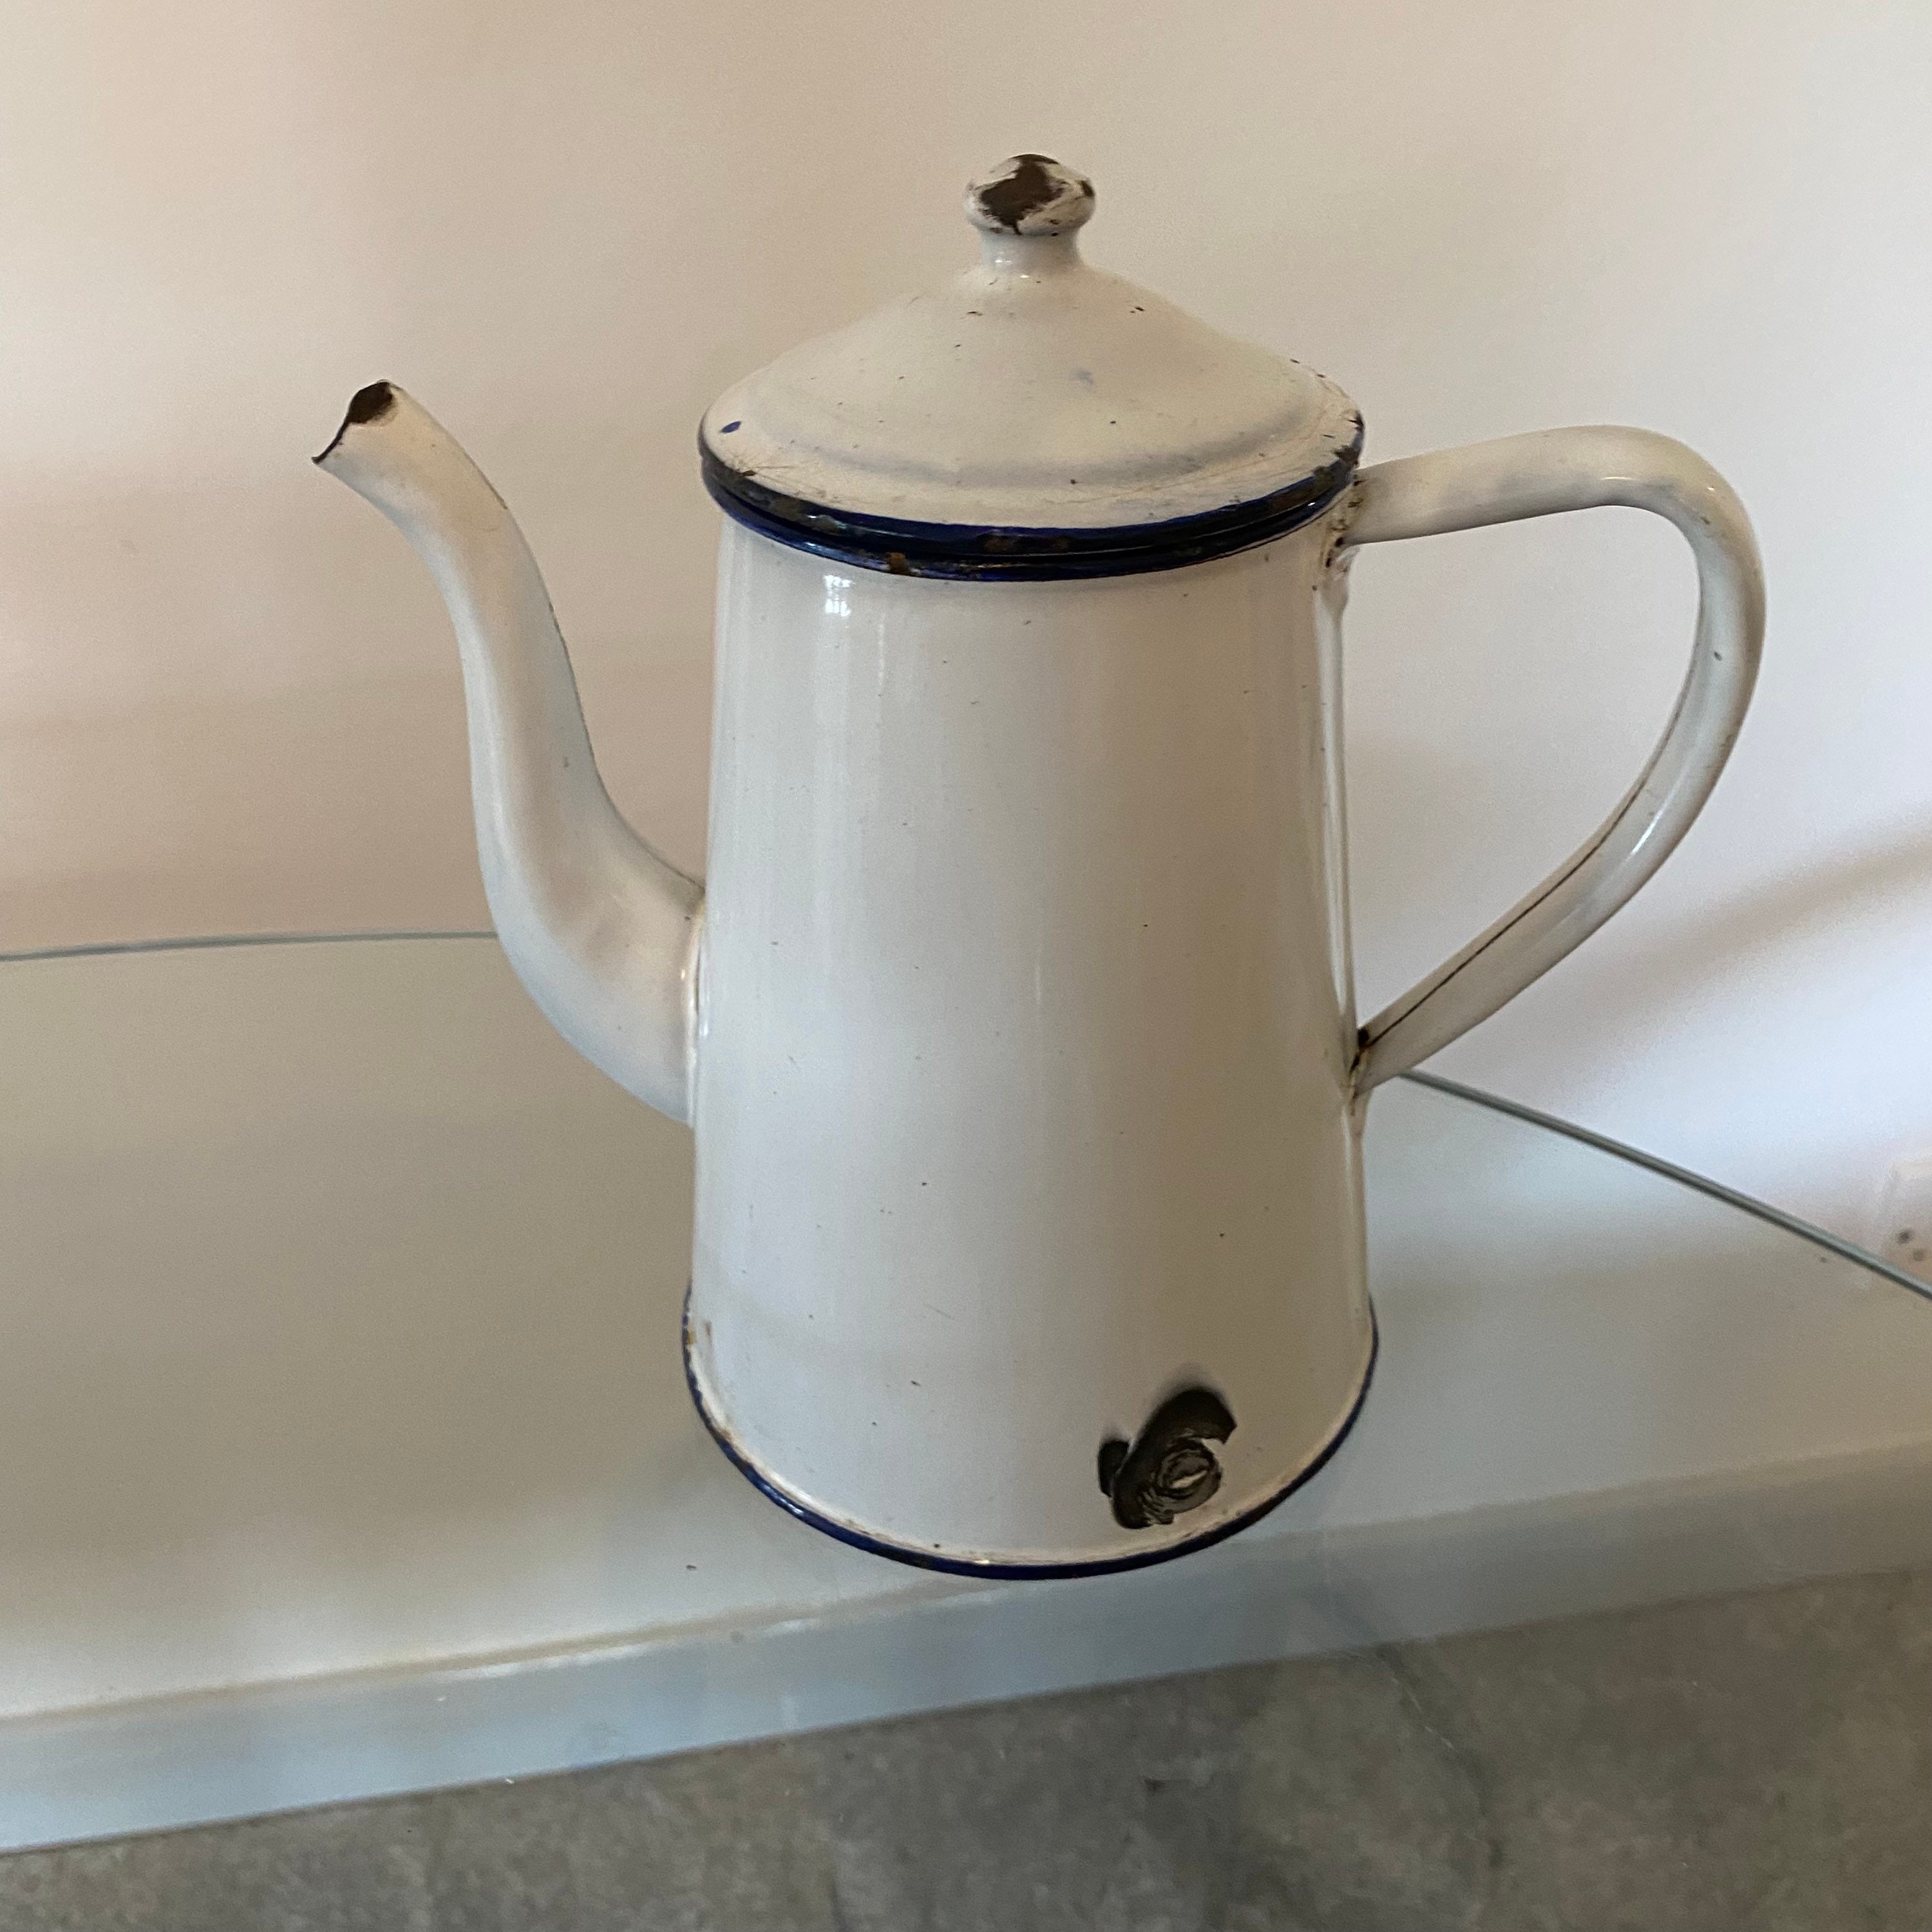 1950s French Enamel Stove Top Coffee Pot Blue Coffee Percolator Blue Rustic  Coffee Biggin French Country Cafetiere 